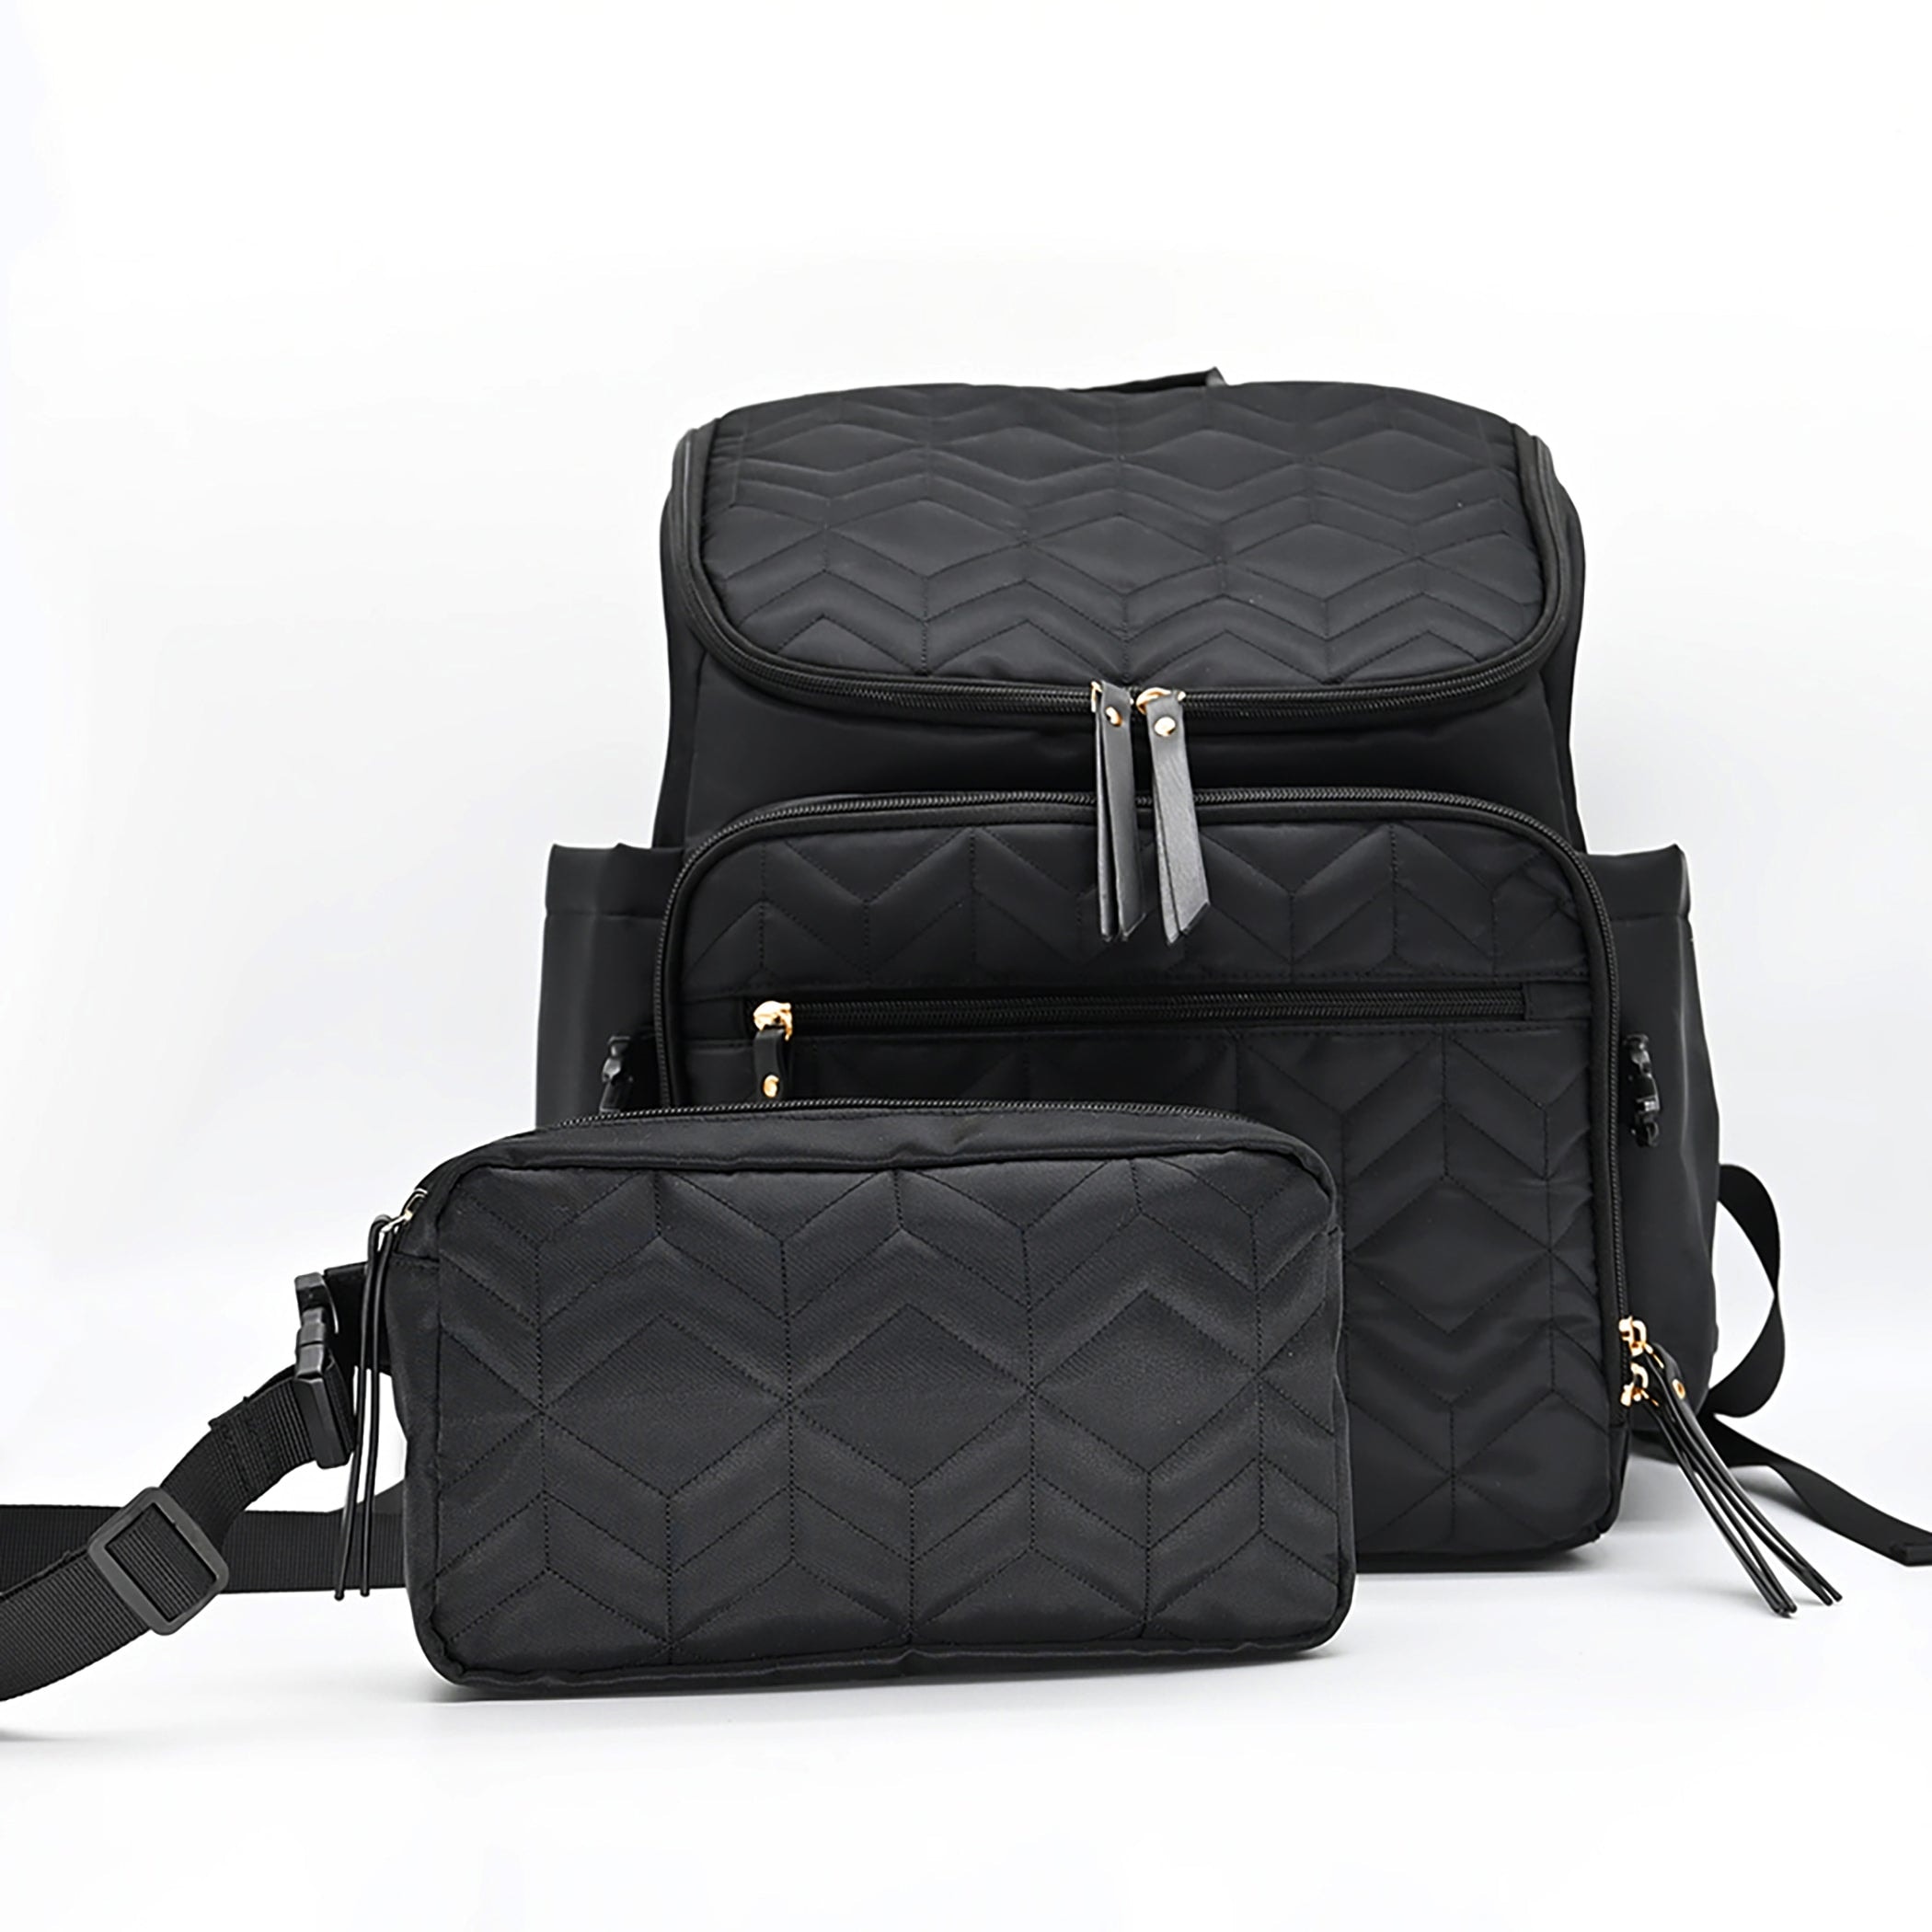 Backpack Diaper Bag with Removable Cross Body Bag - Black